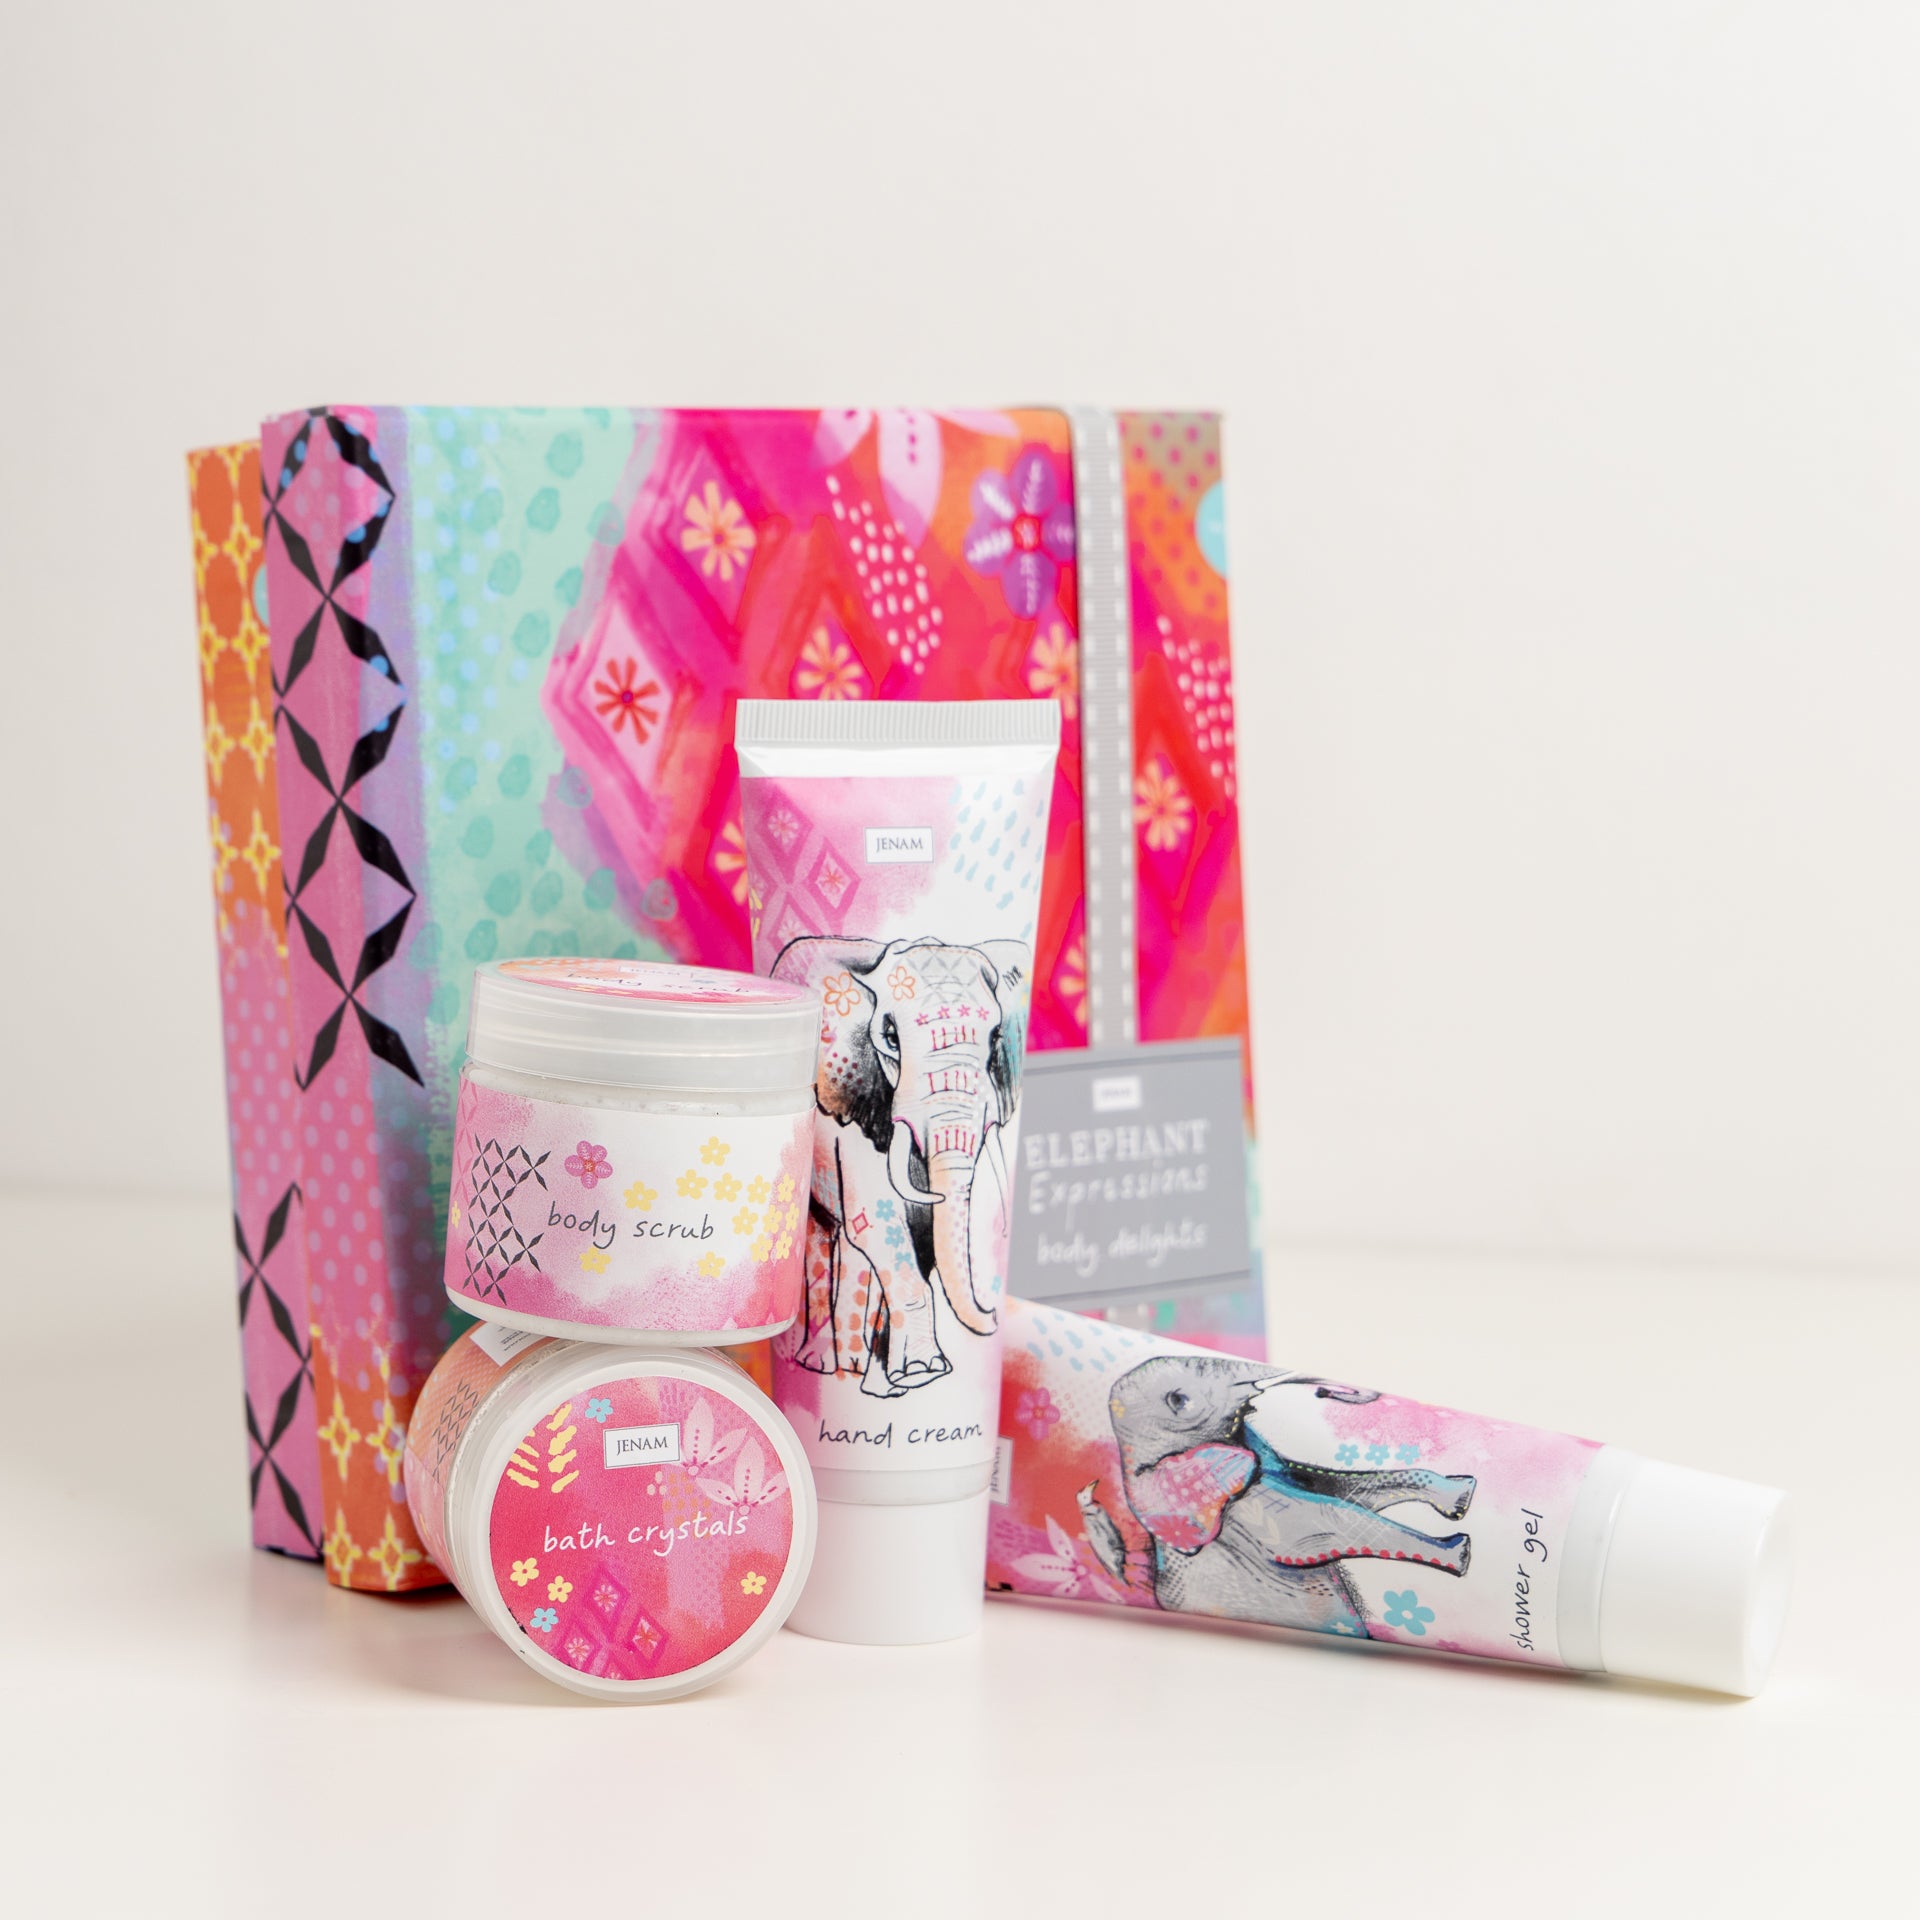 Elephant Expressions - Body Delights Gift Set